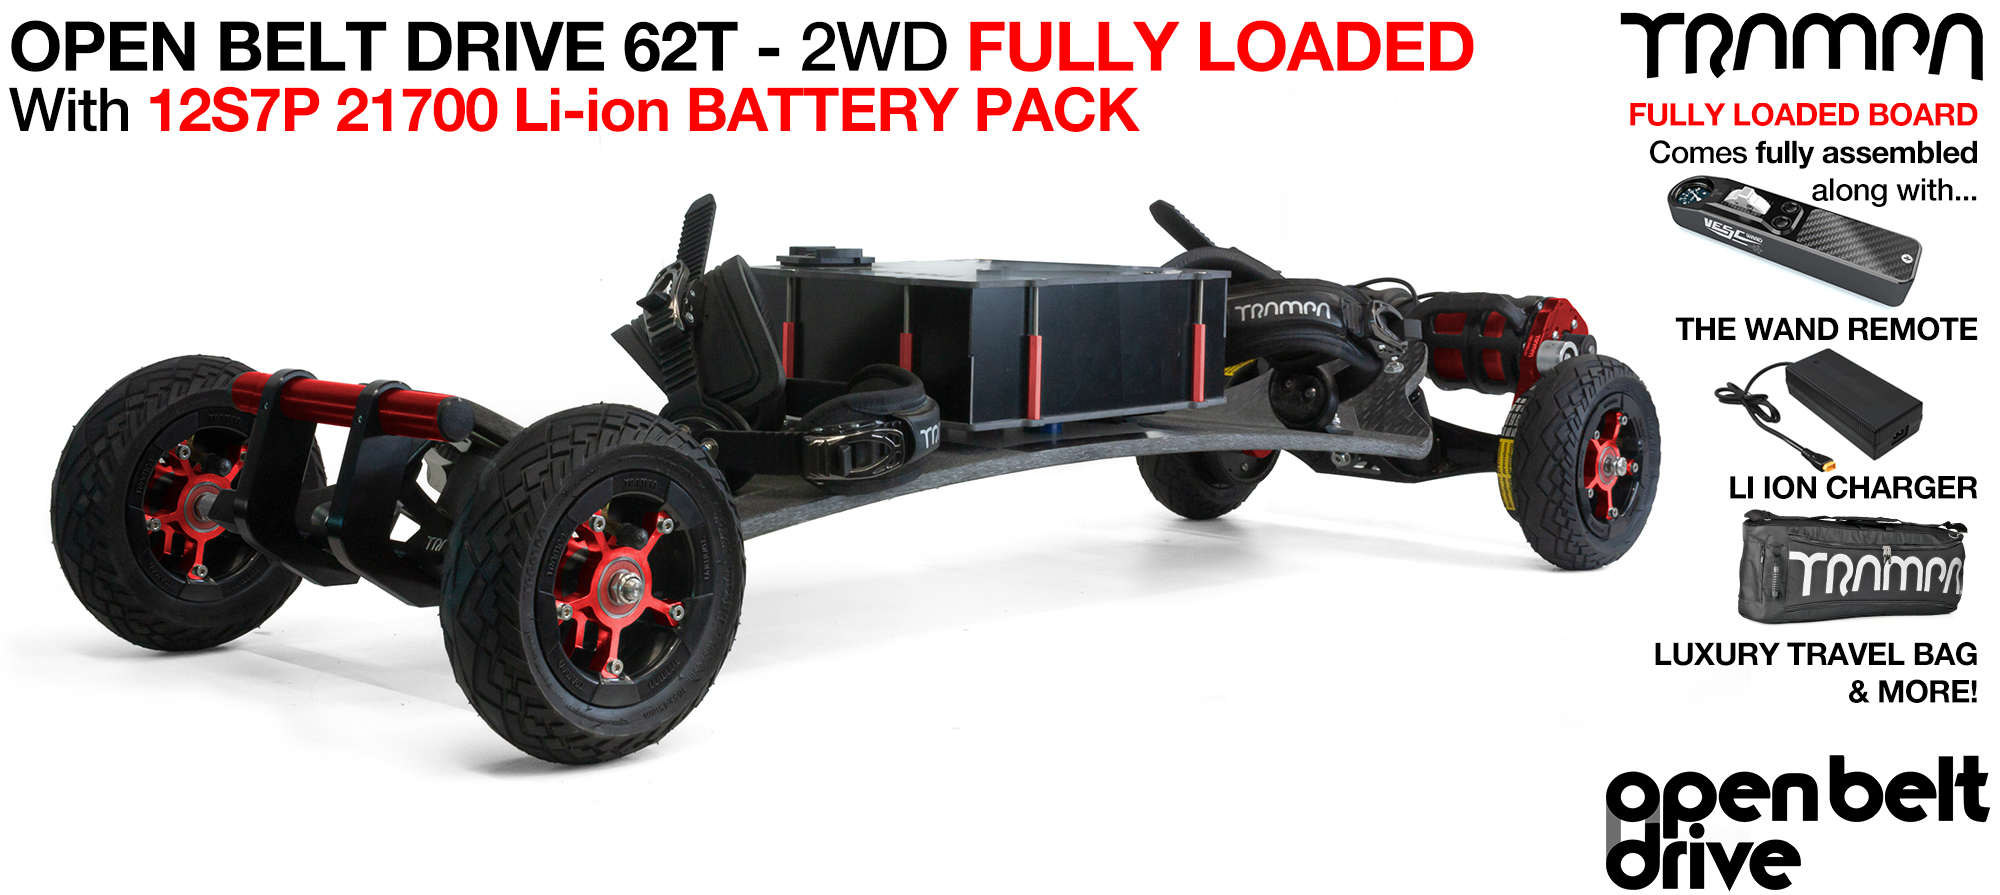 2WD 66T Open Belt Drive TRAMPA Electric Mountainboard with 6 Inch URBAN TREADs Wheels & 62 Tooth Pulleys - LOADED 21700 CELL Pack